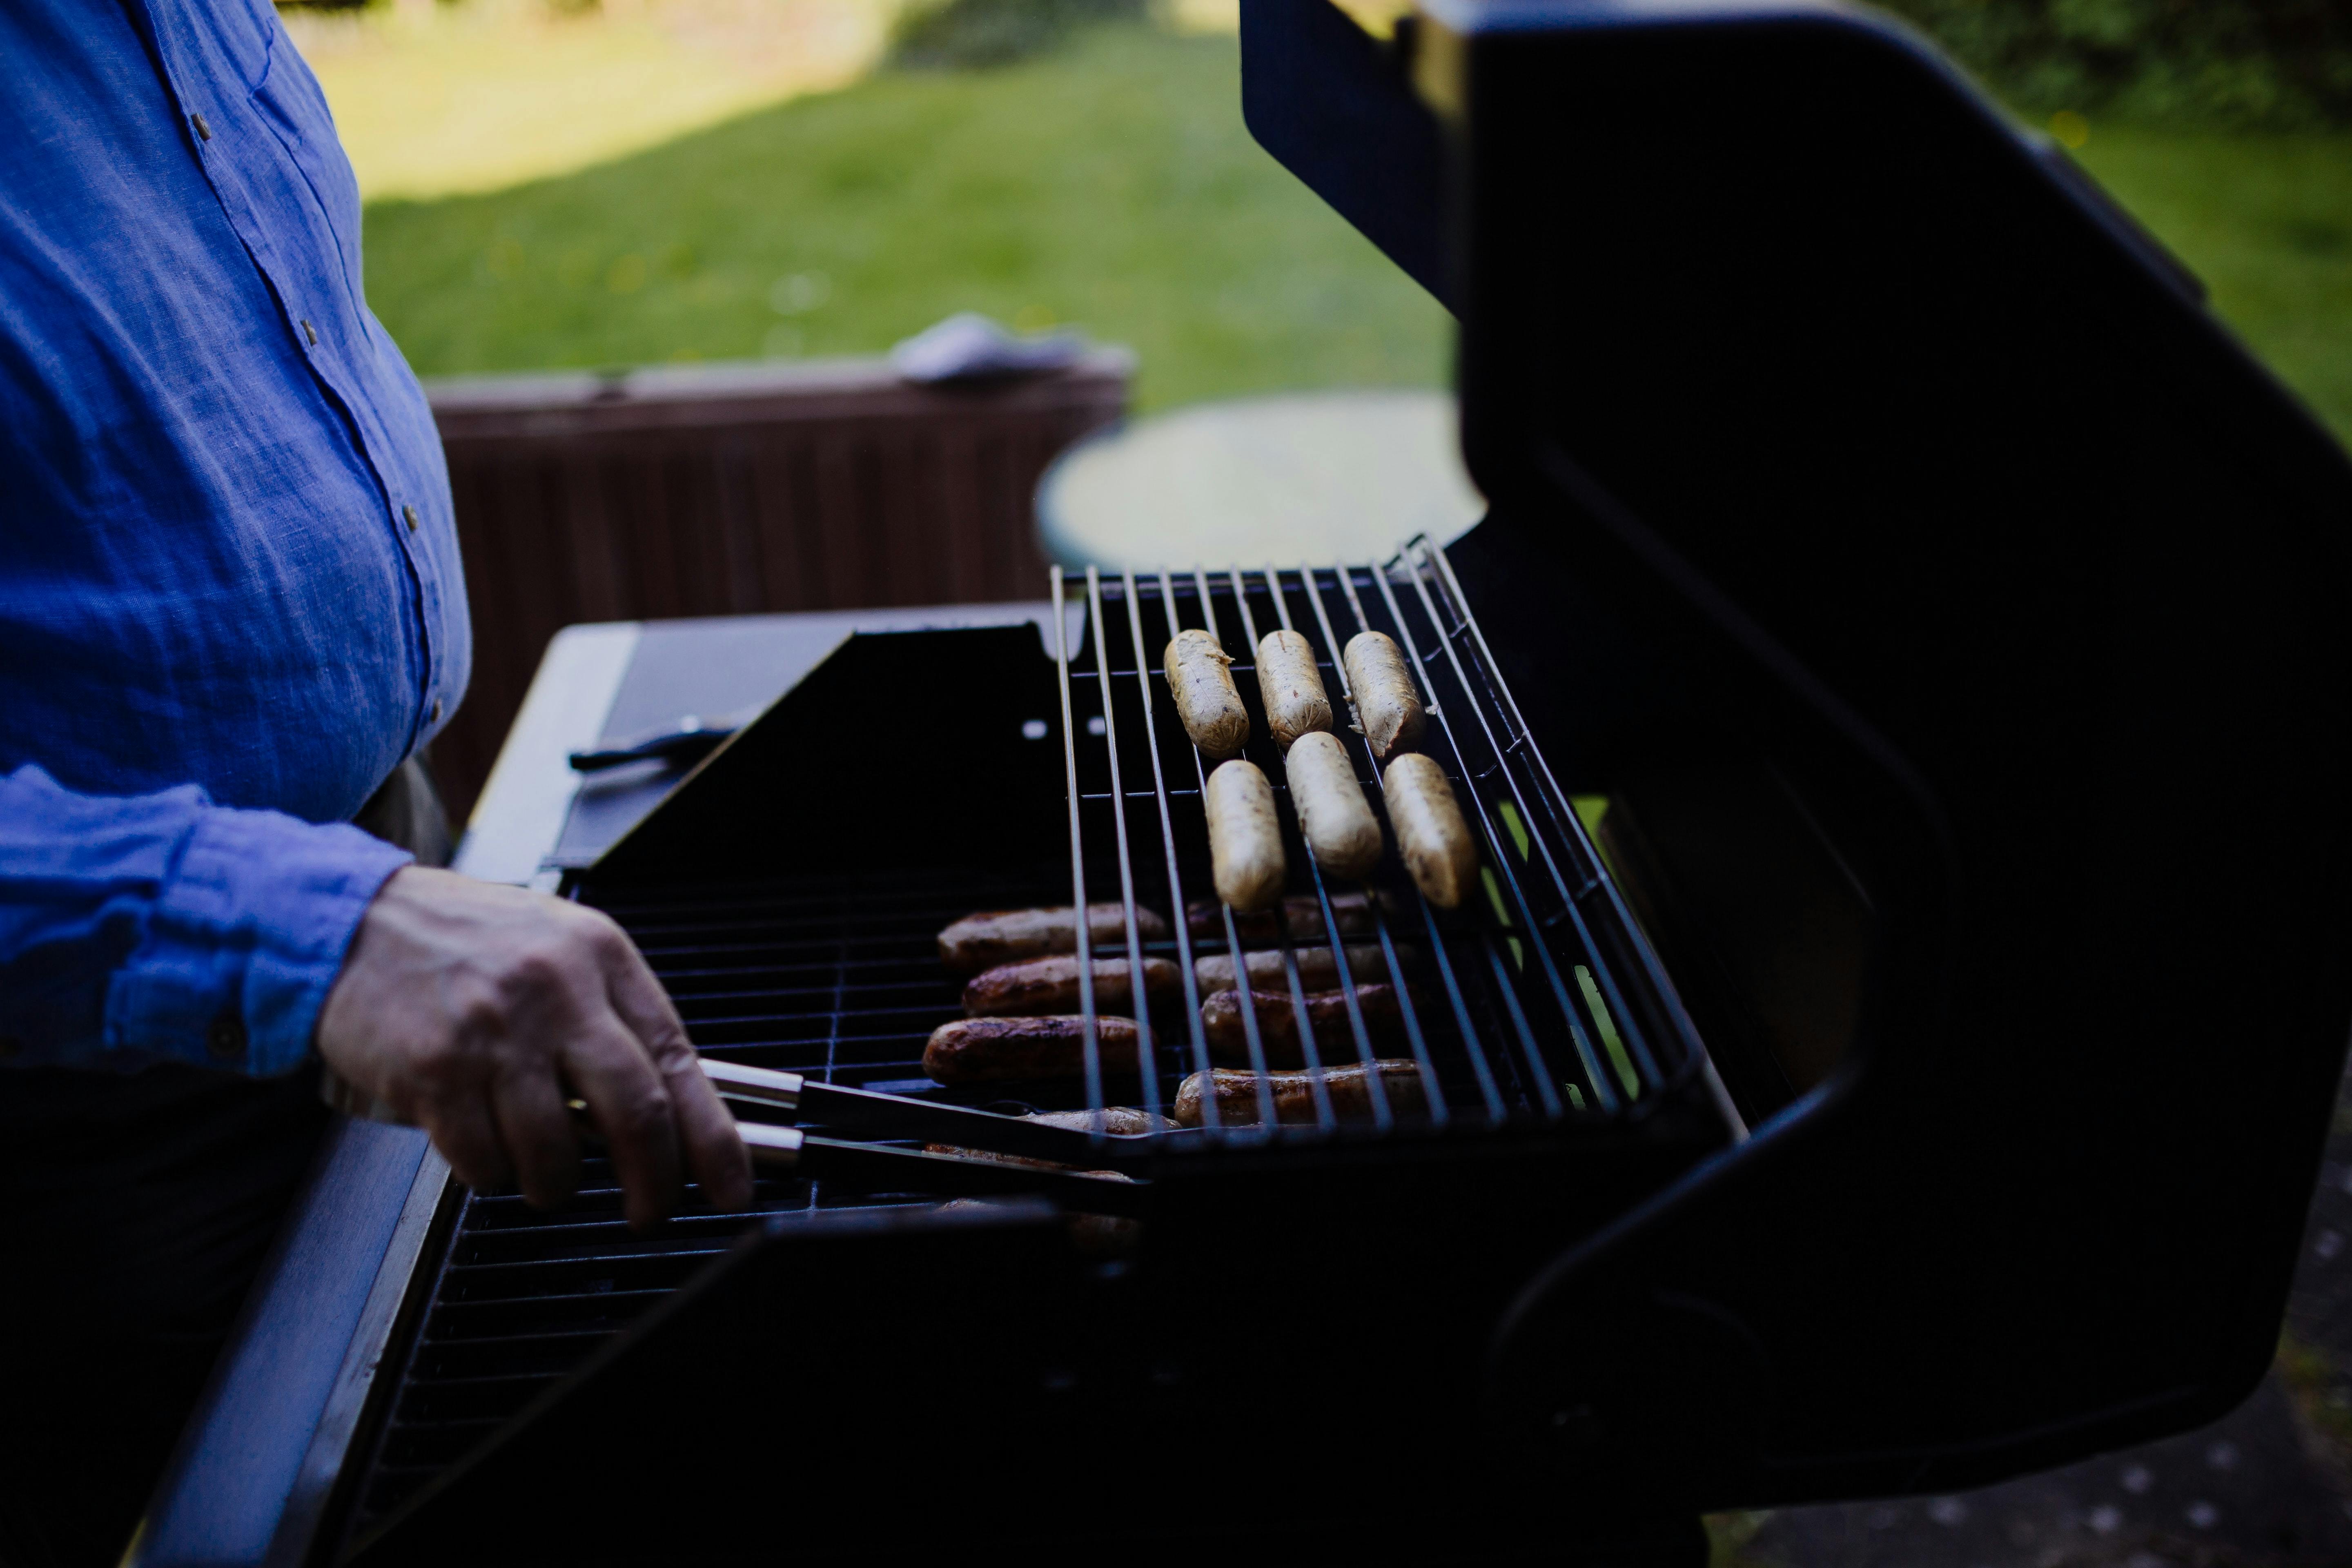 A man moves some things around on a grill. 